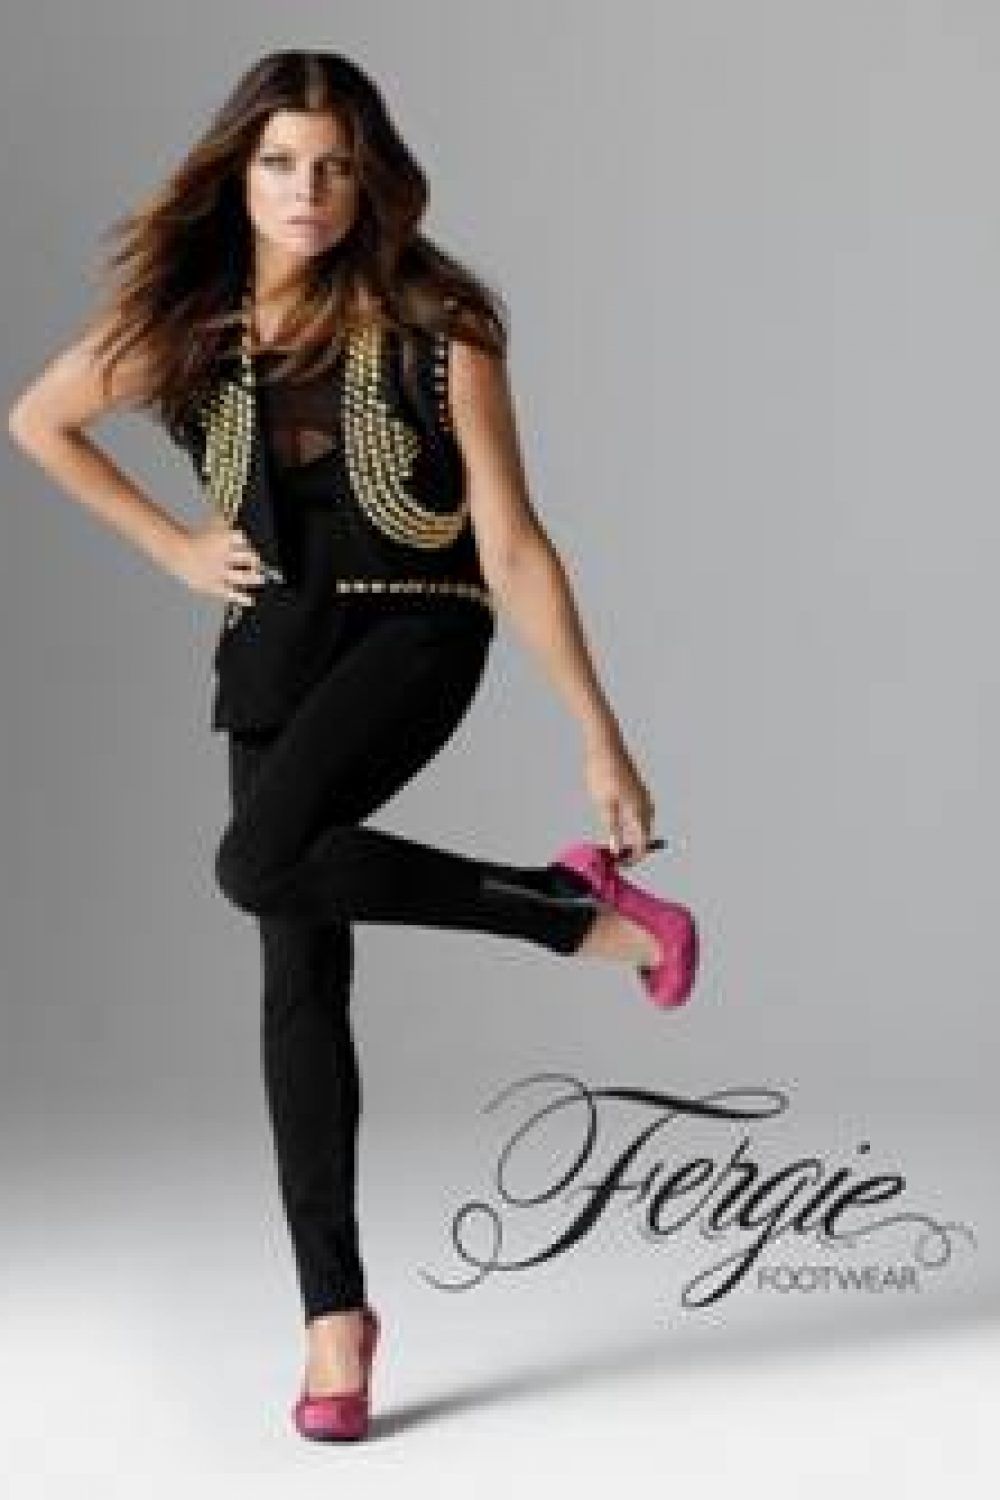 Fergie’s Pink Hope Shoe Helps Fight Breast Cancer